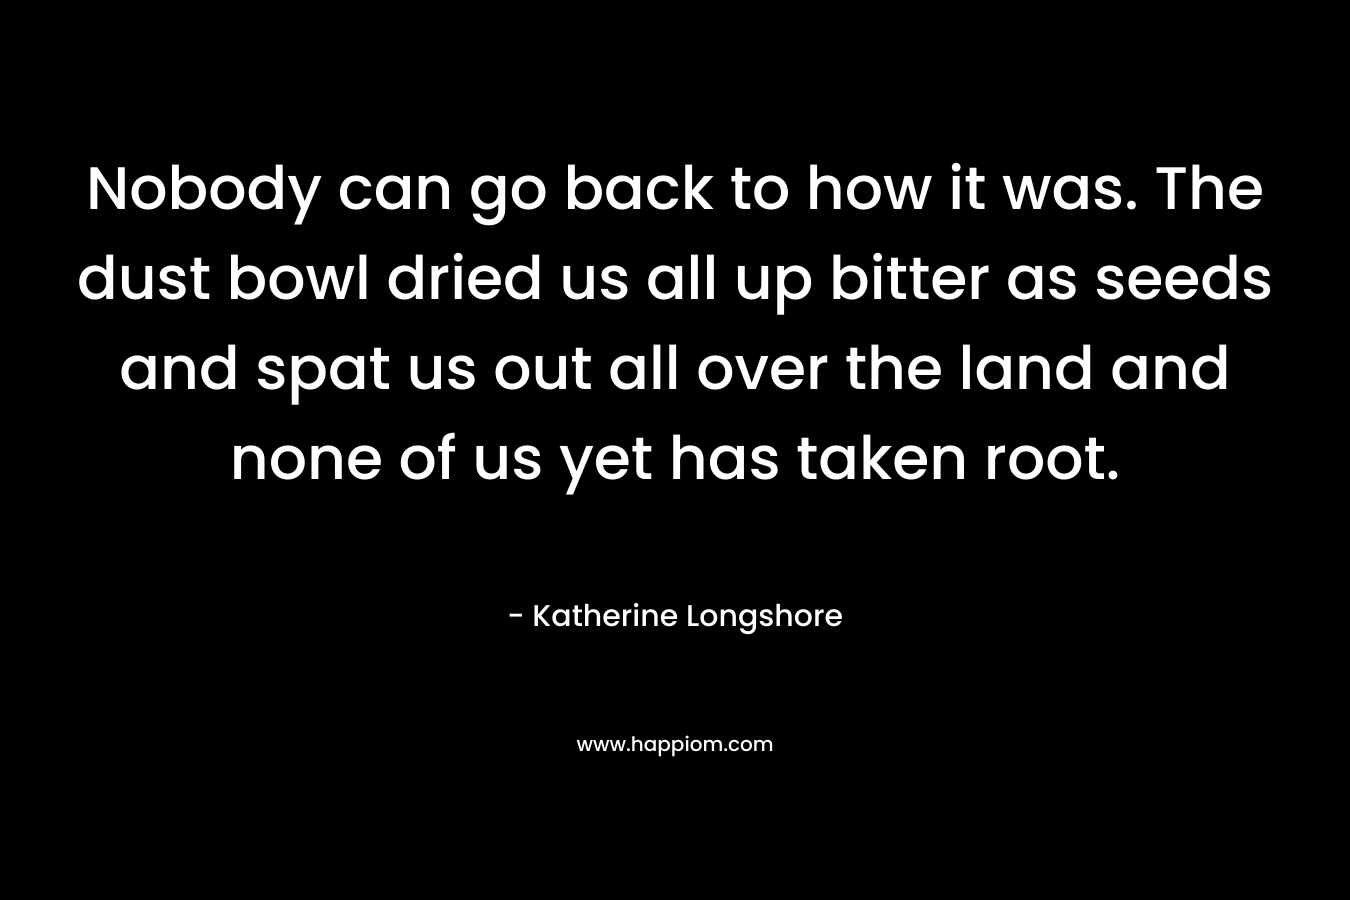 Nobody can go back to how it was. The dust bowl dried us all up bitter as seeds and spat us out all over the land and none of us yet has taken root. – Katherine Longshore